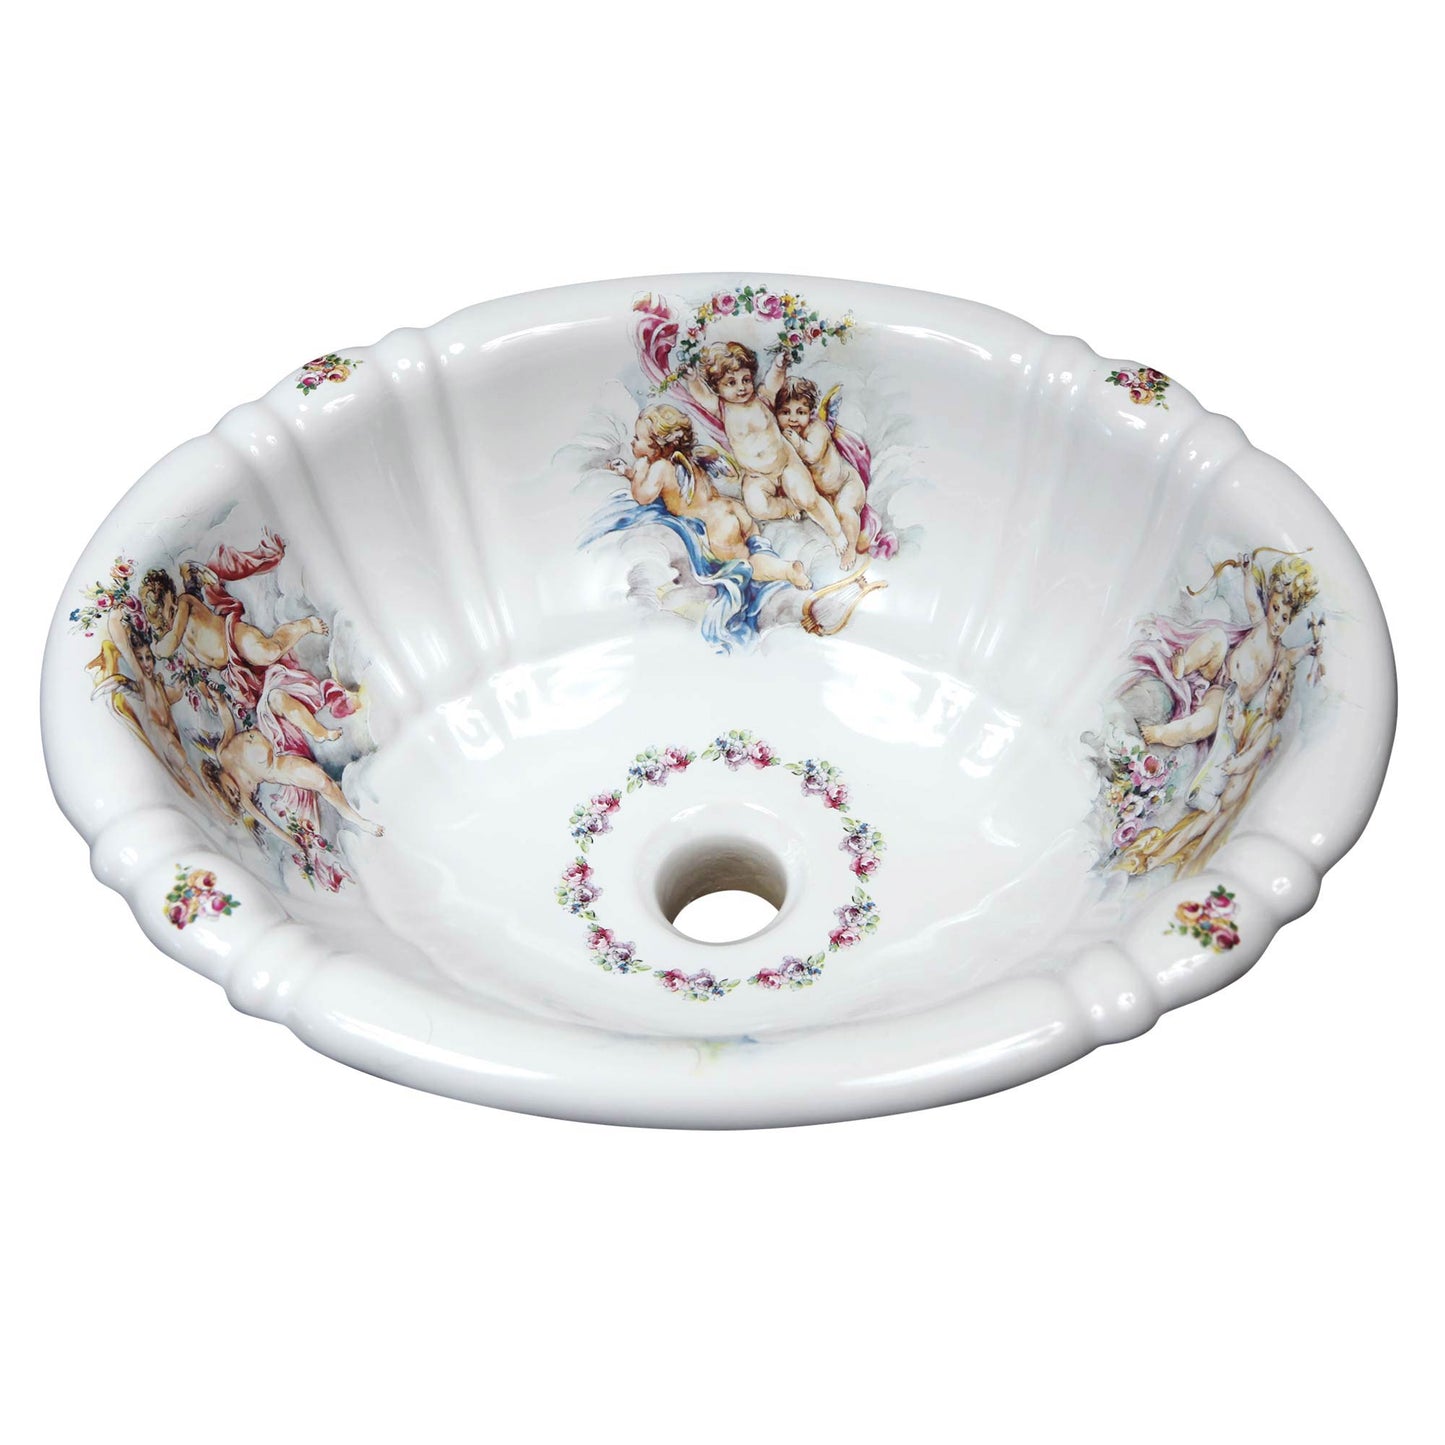 Pretty fluted bathroom drop-in basin painted with cherubs, flowers and ribbons